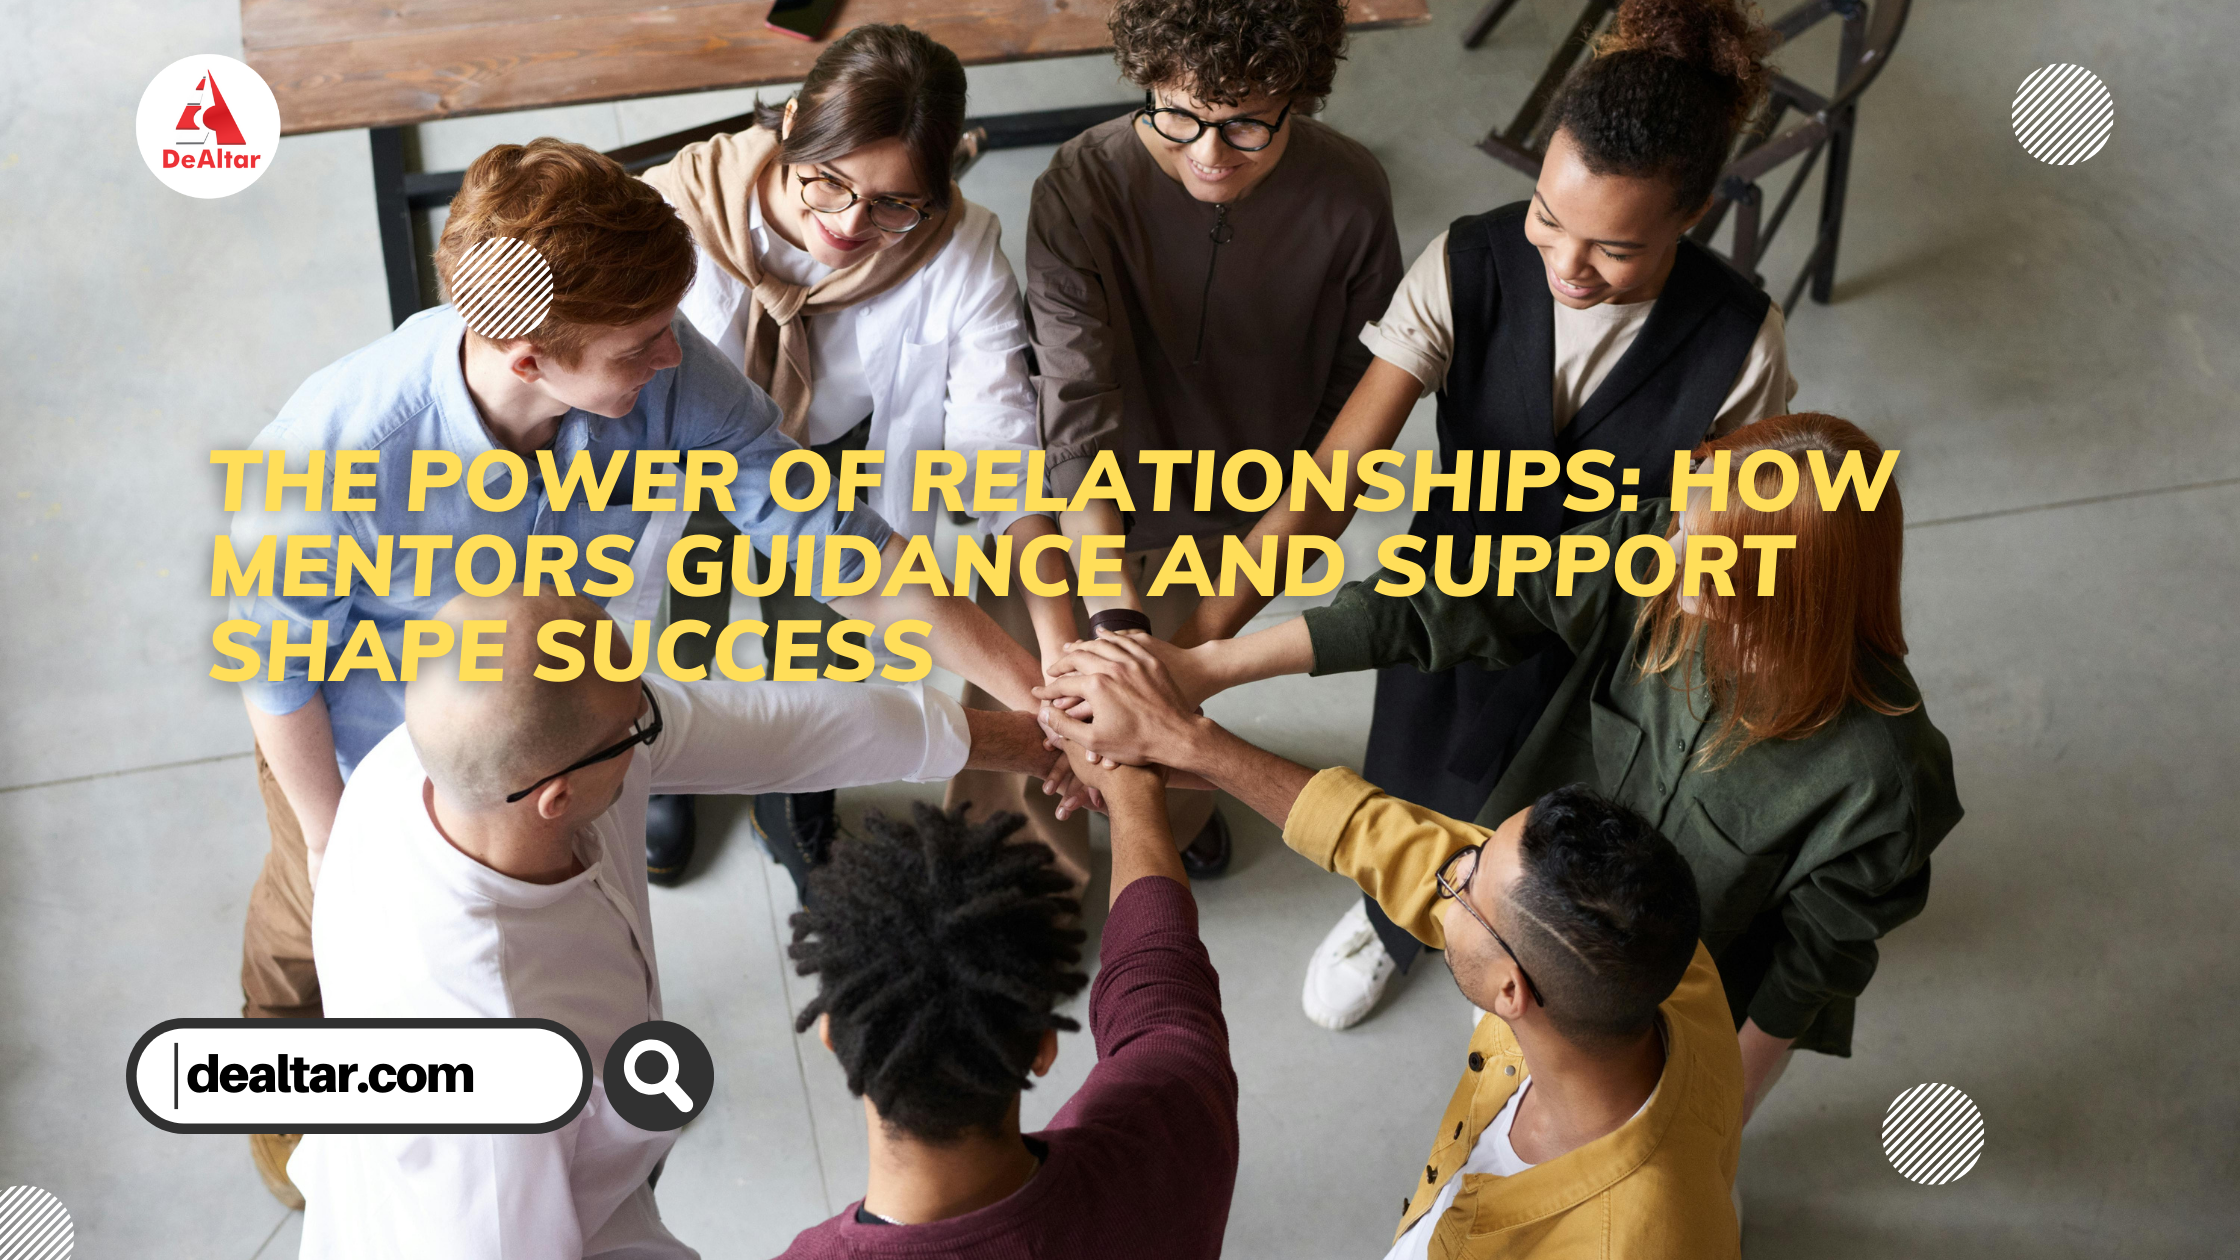 The power of relationships: How mentors guidance and support shape success